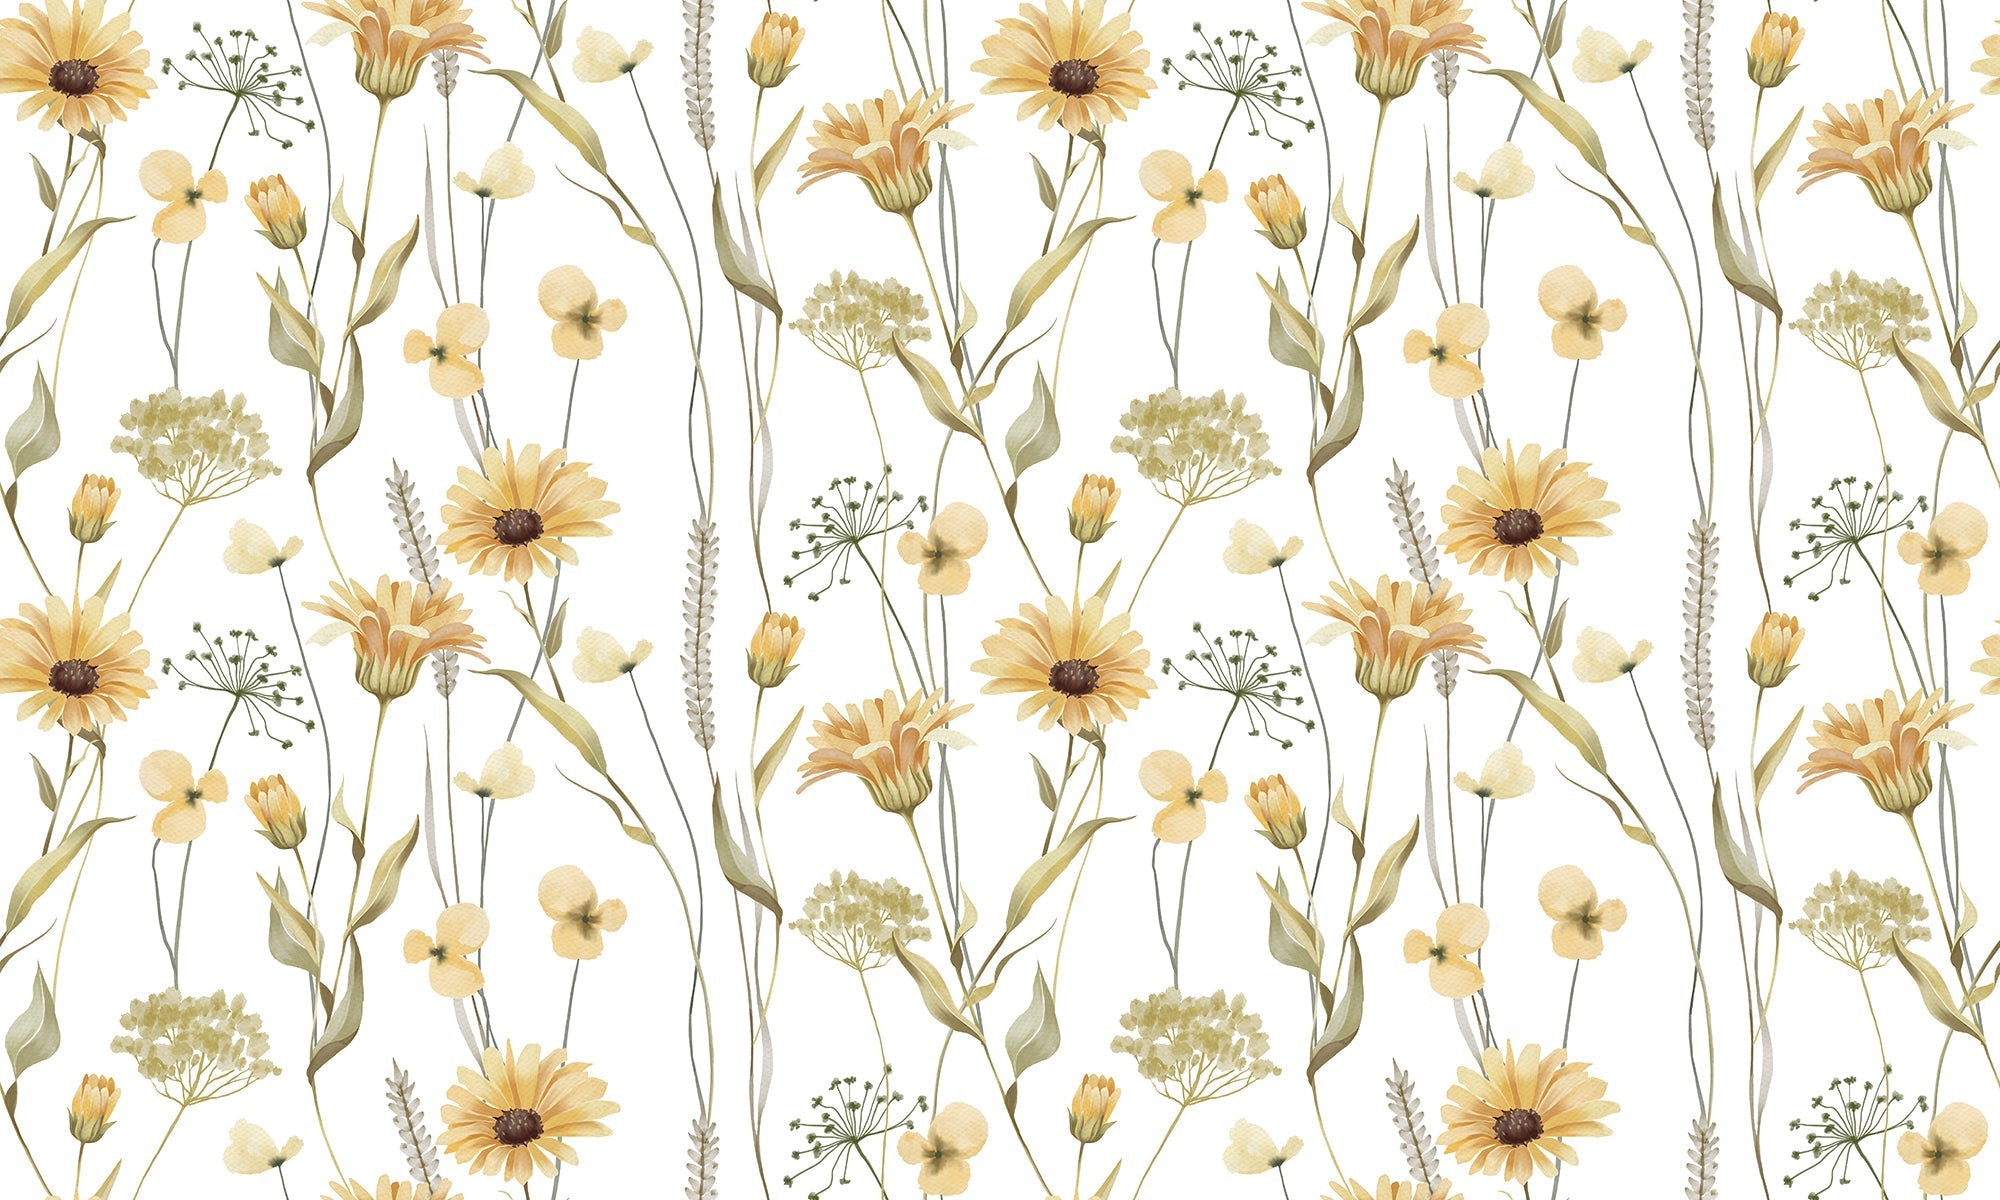 A fullview of the Watercolour Sunflower Wallpaper, highlighting its artful depiction of sunflowers in bloom with watercolor textures that convey a sense of sun-drenched fields and the freshness of spring.